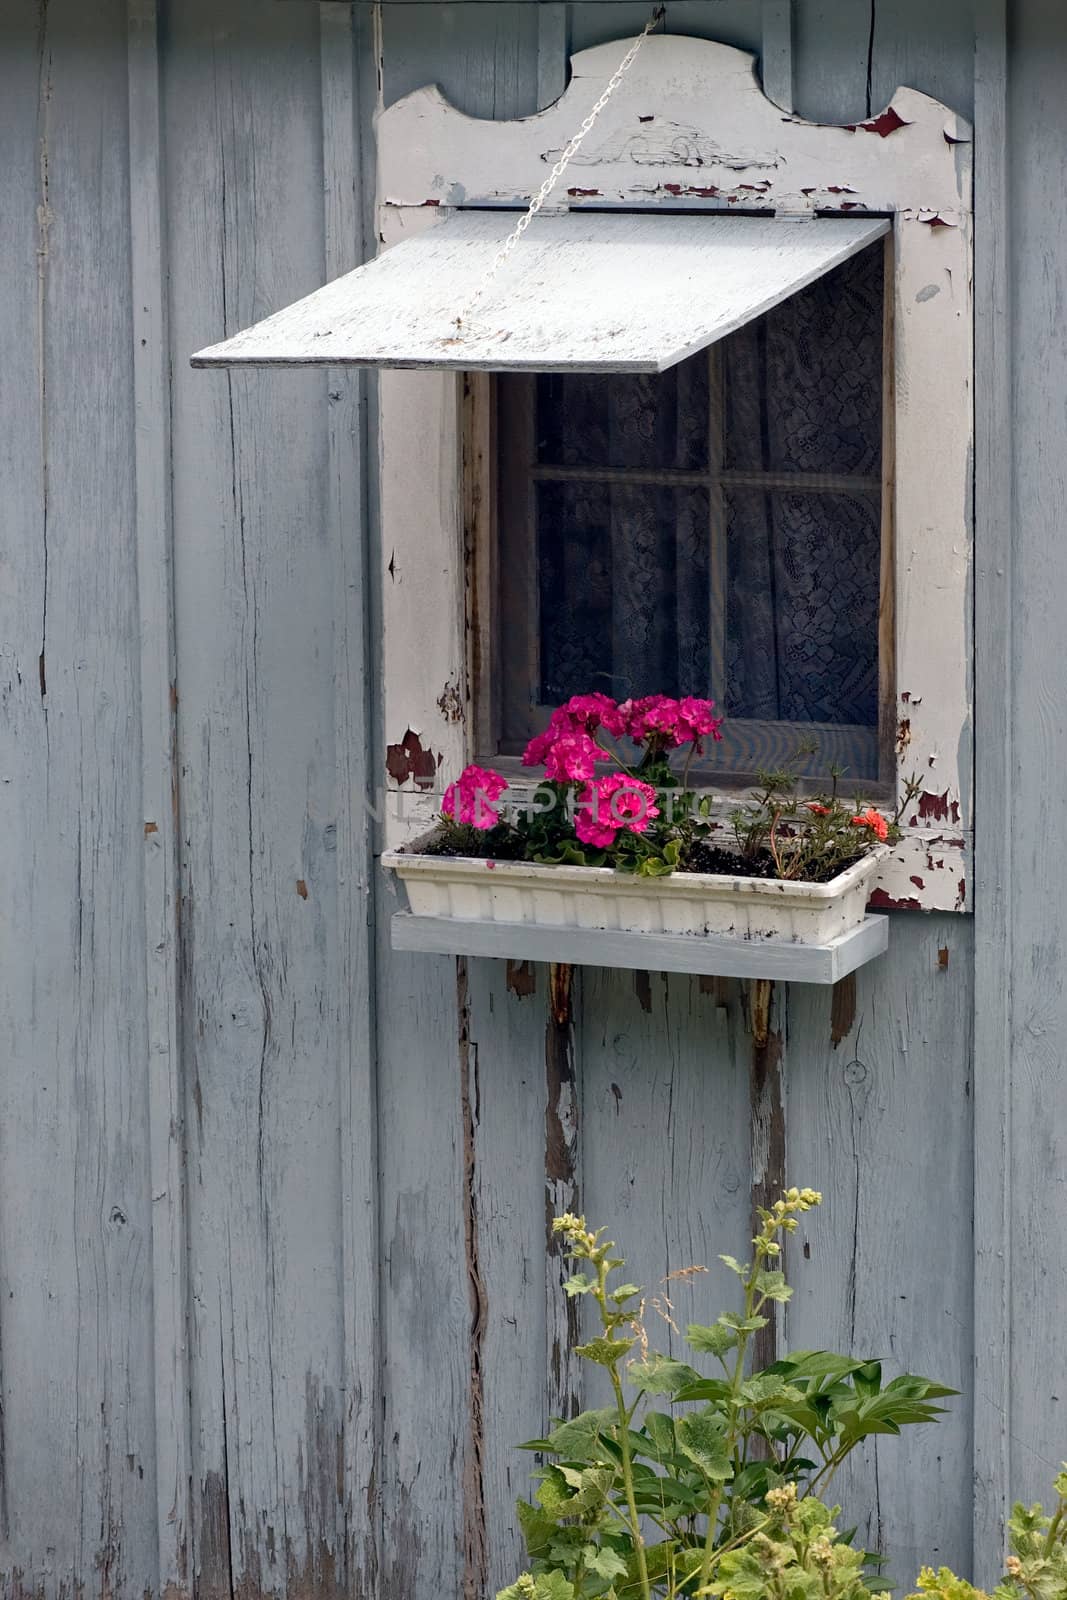 An old cottage wall with open window and flower box.